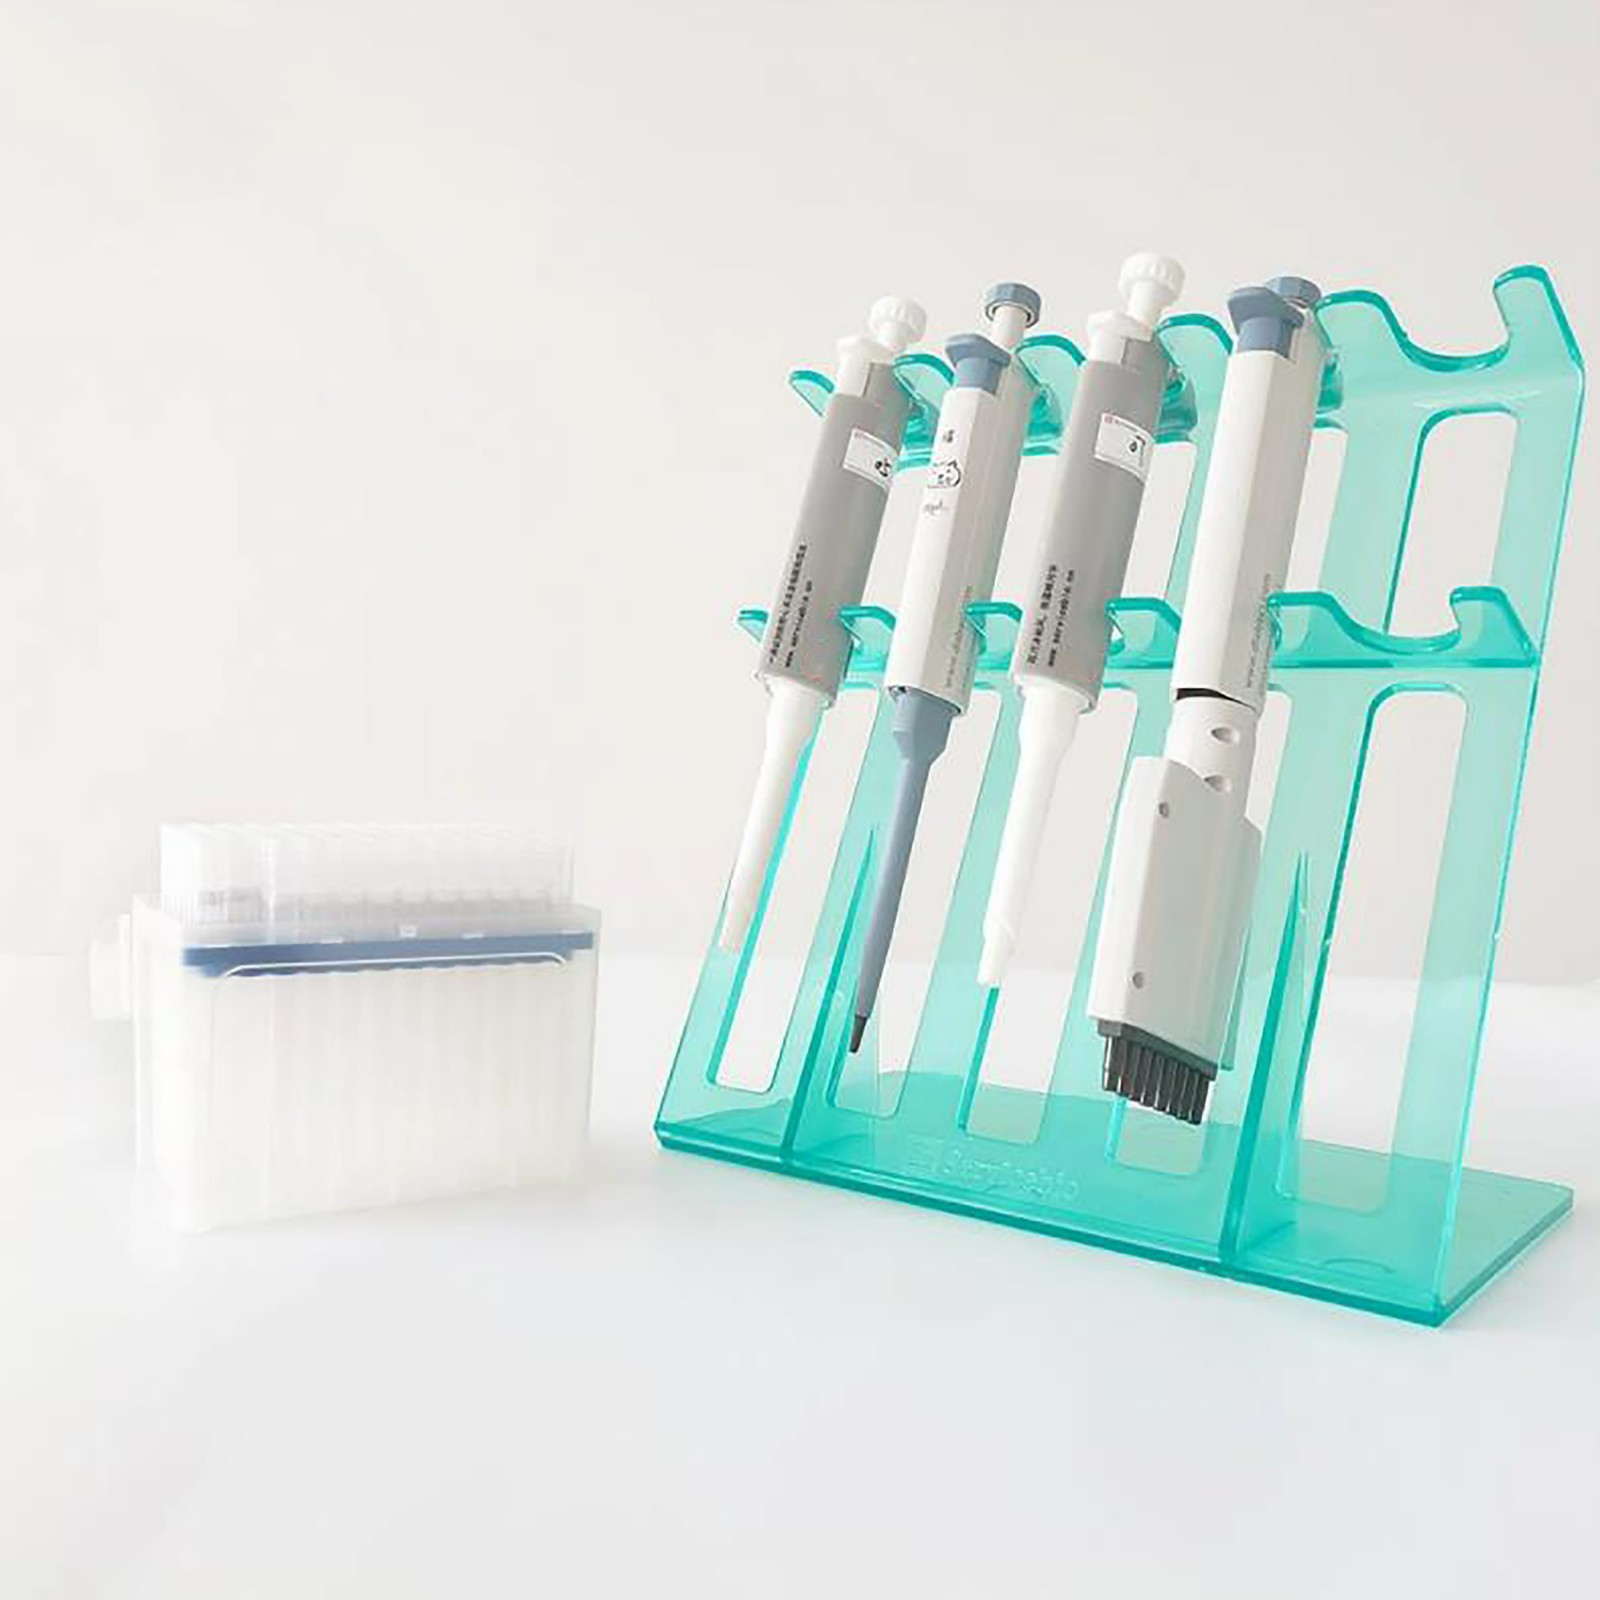 Pipettors <a href=https://www.hwtai.com/search/index.html?name=holder target='_blank'>holder</a> Rack 7.jpg